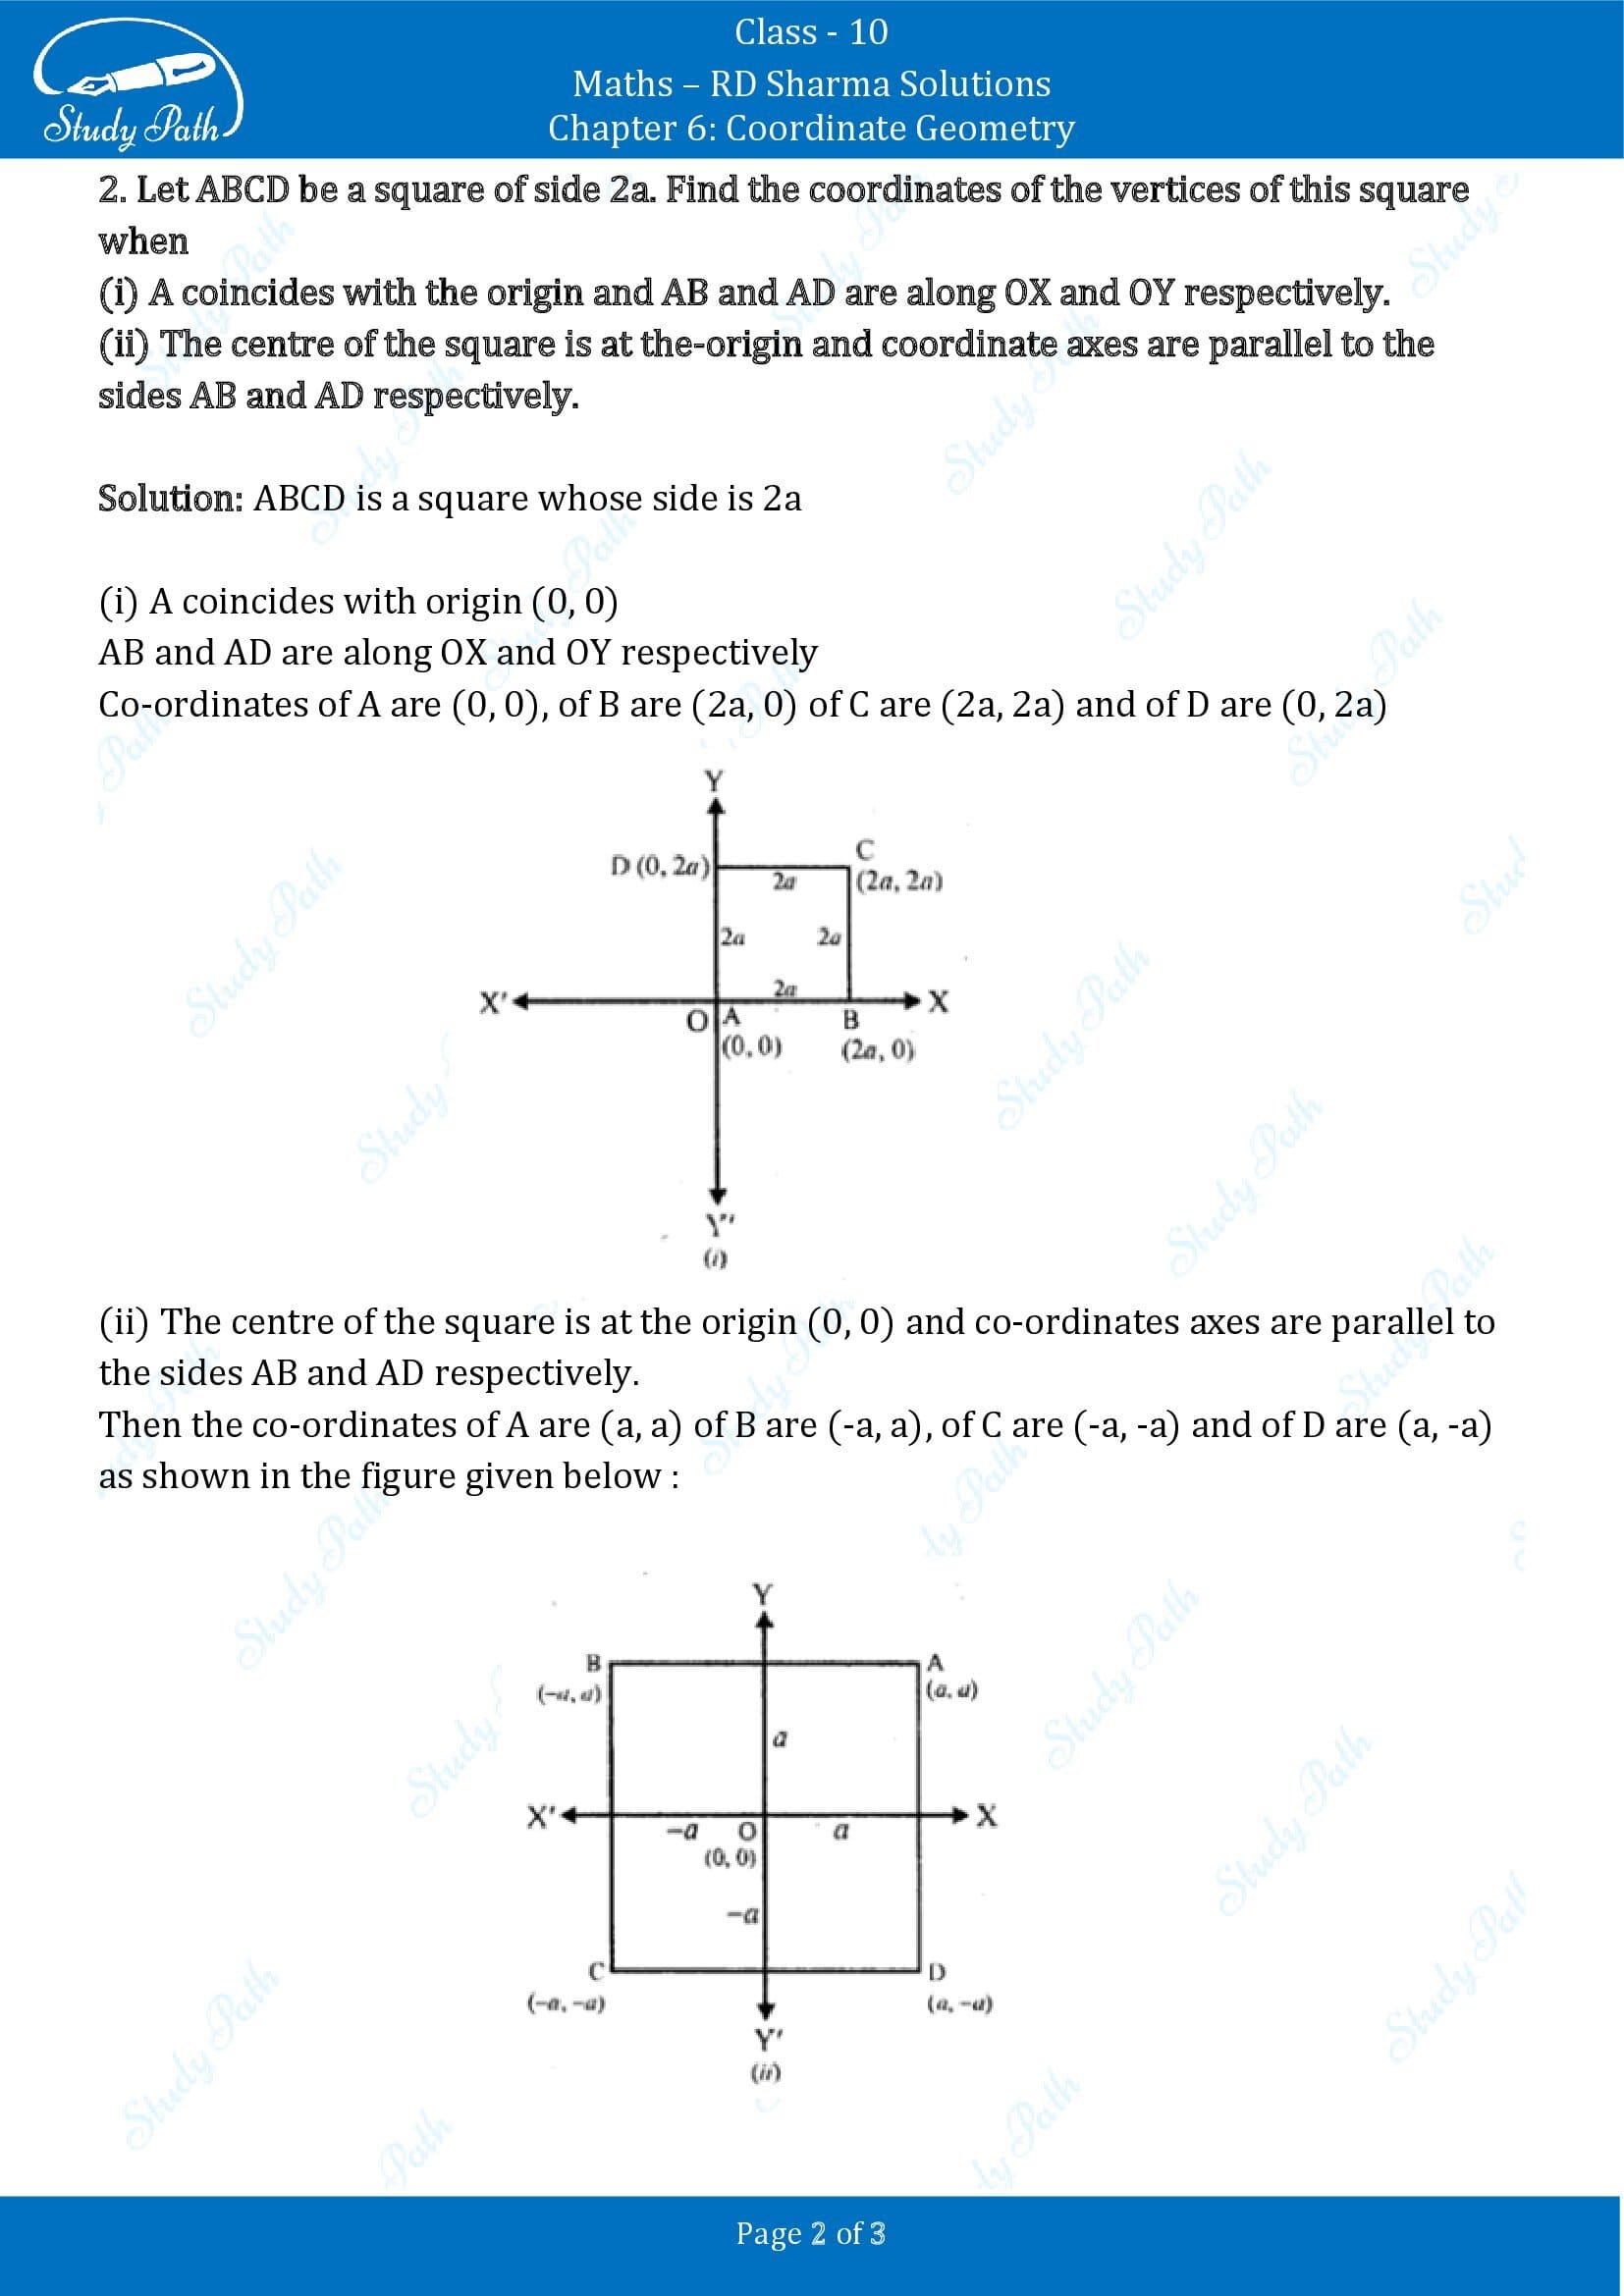 RD Sharma Solutions Class 10 Chapter 6 Coordinate Geometry Exercise 6.1 00002